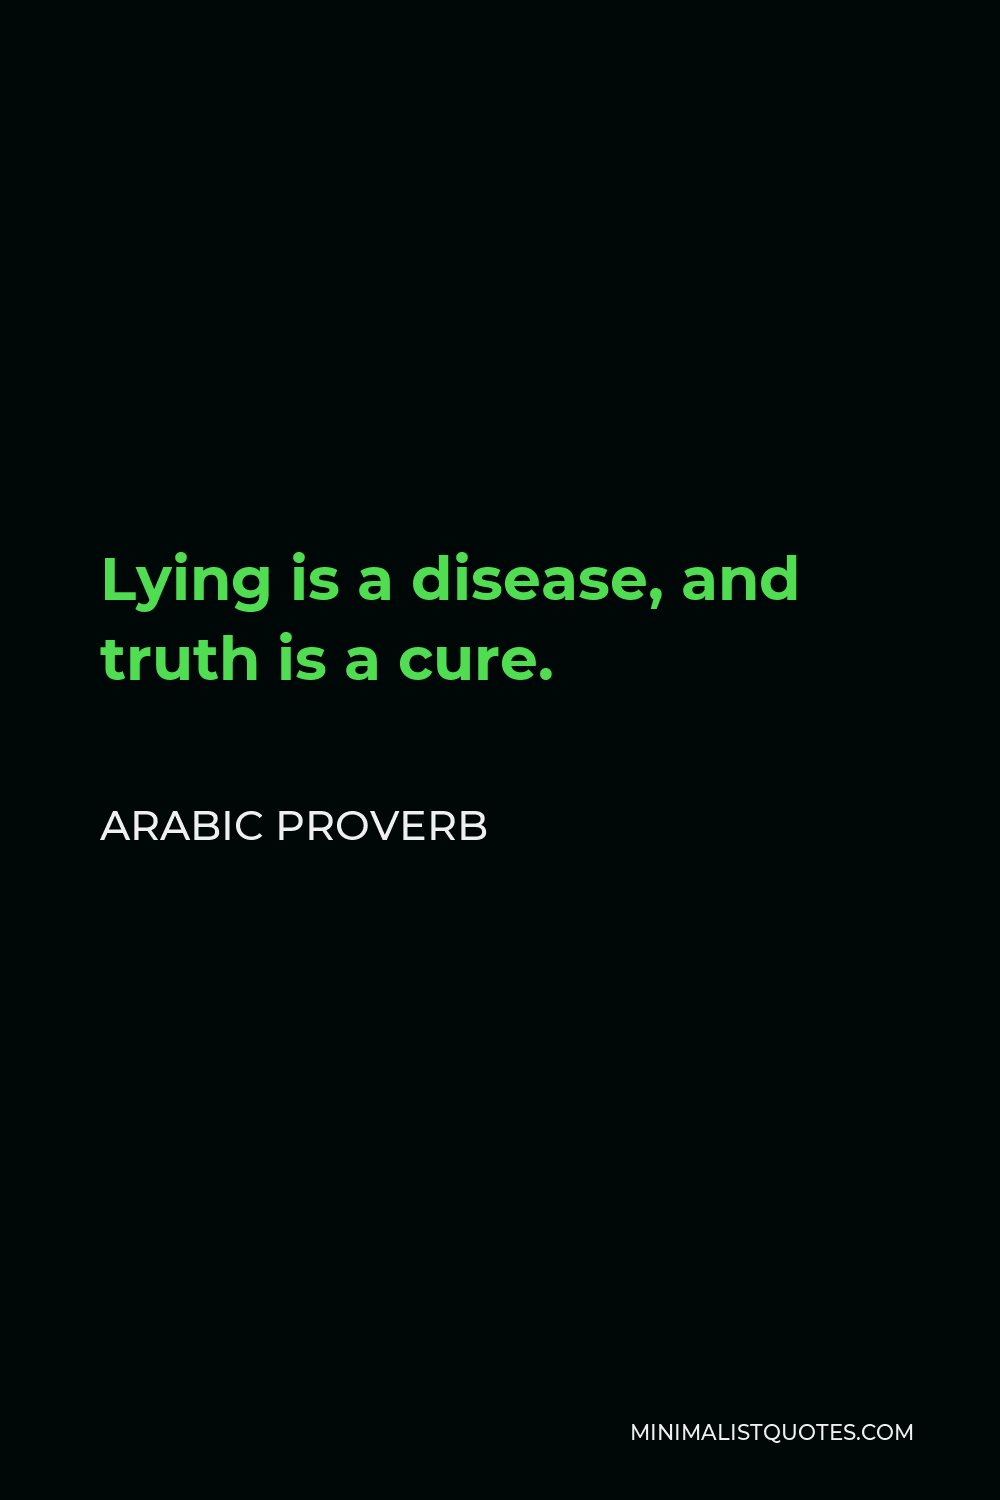 Arabic Proverb Quote - Lying is a disease, and truth is a cure.